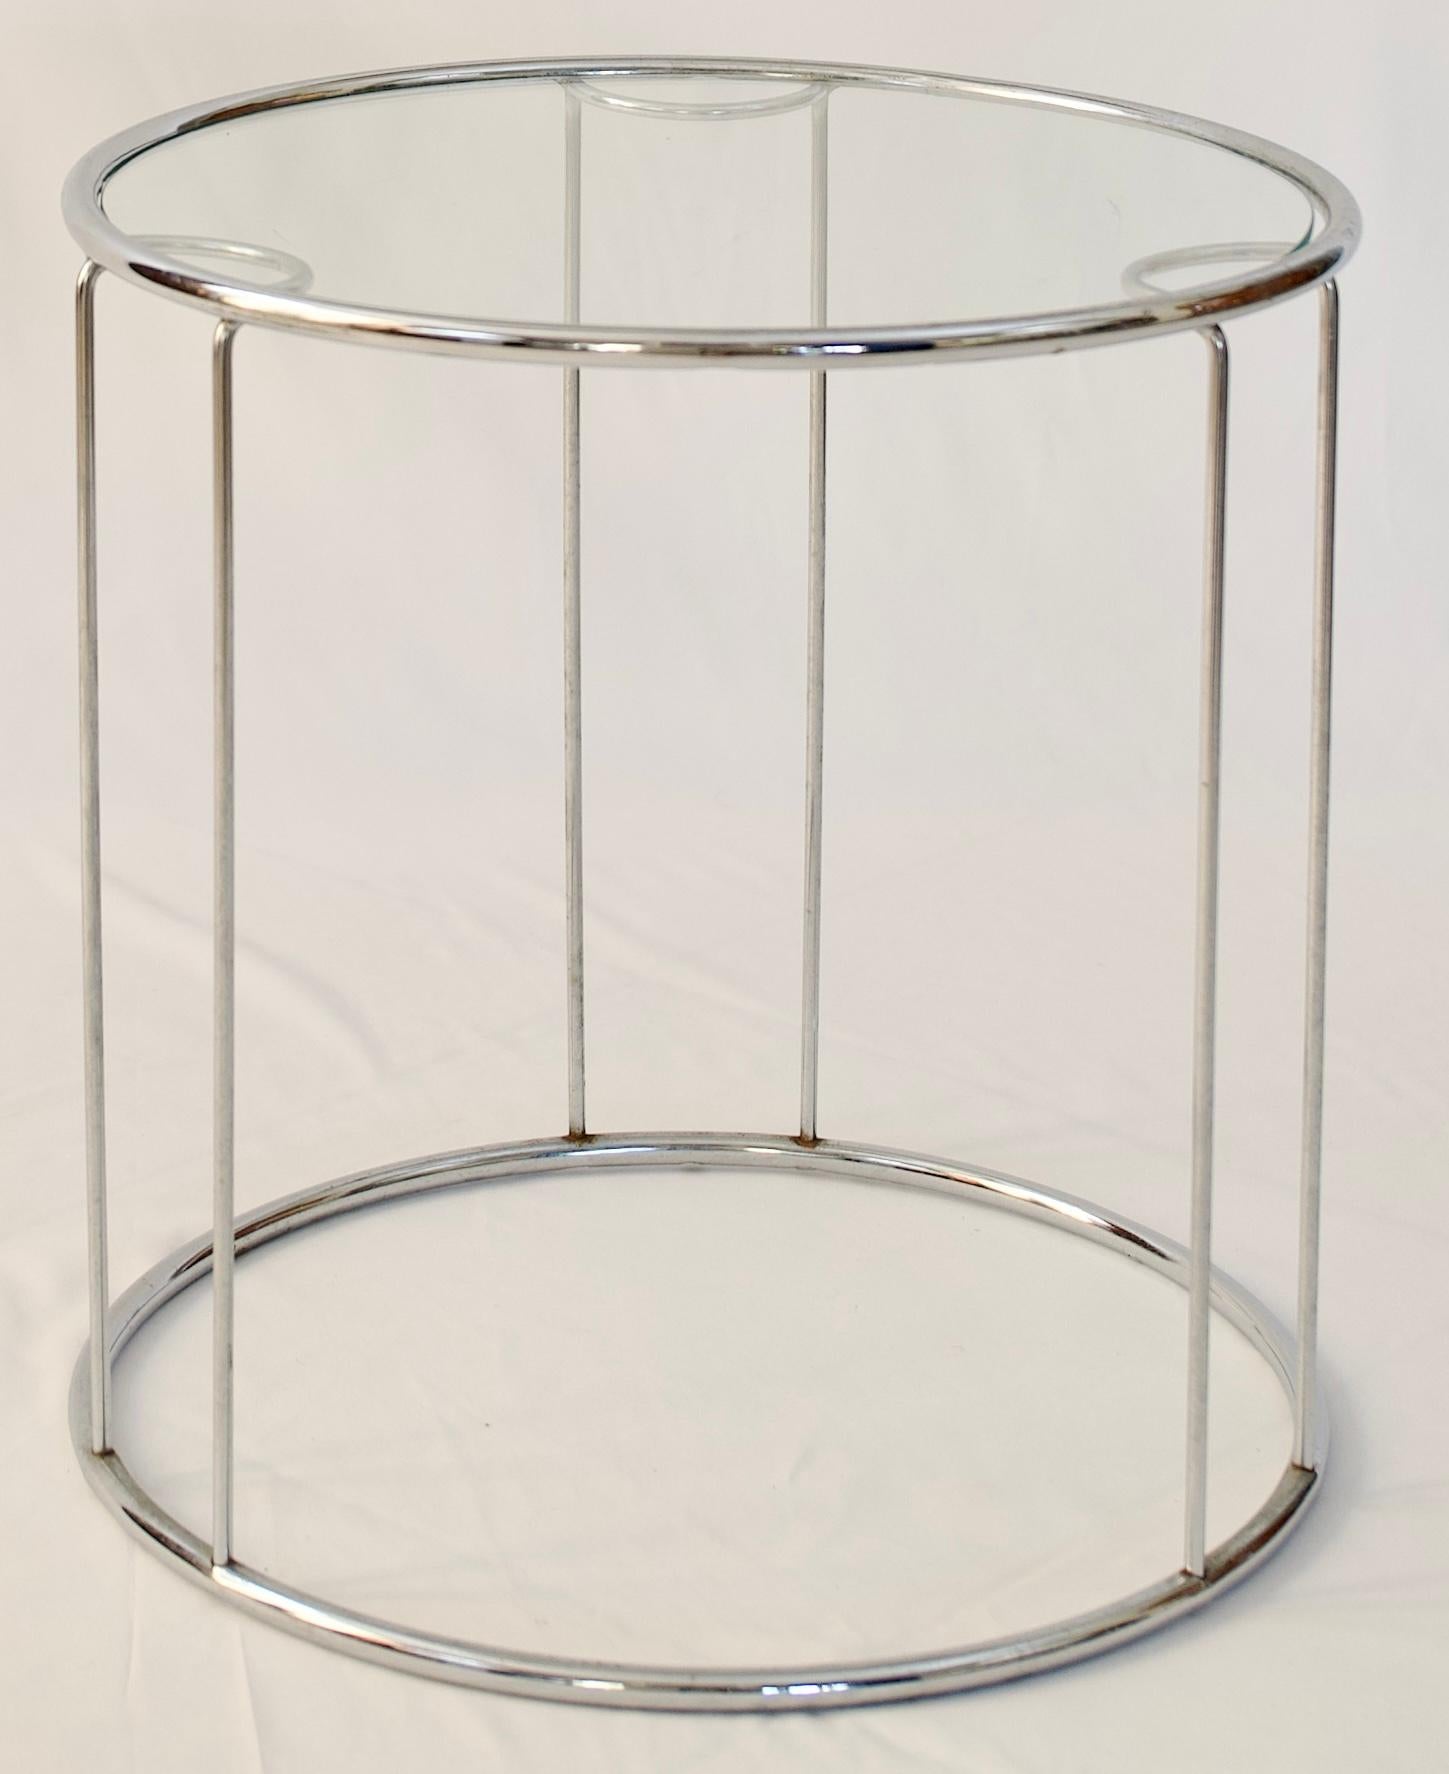 Hollywood Regency Set of Three Round Chrome and Glass Nesting End Tables by Milo Baughman  For Sale